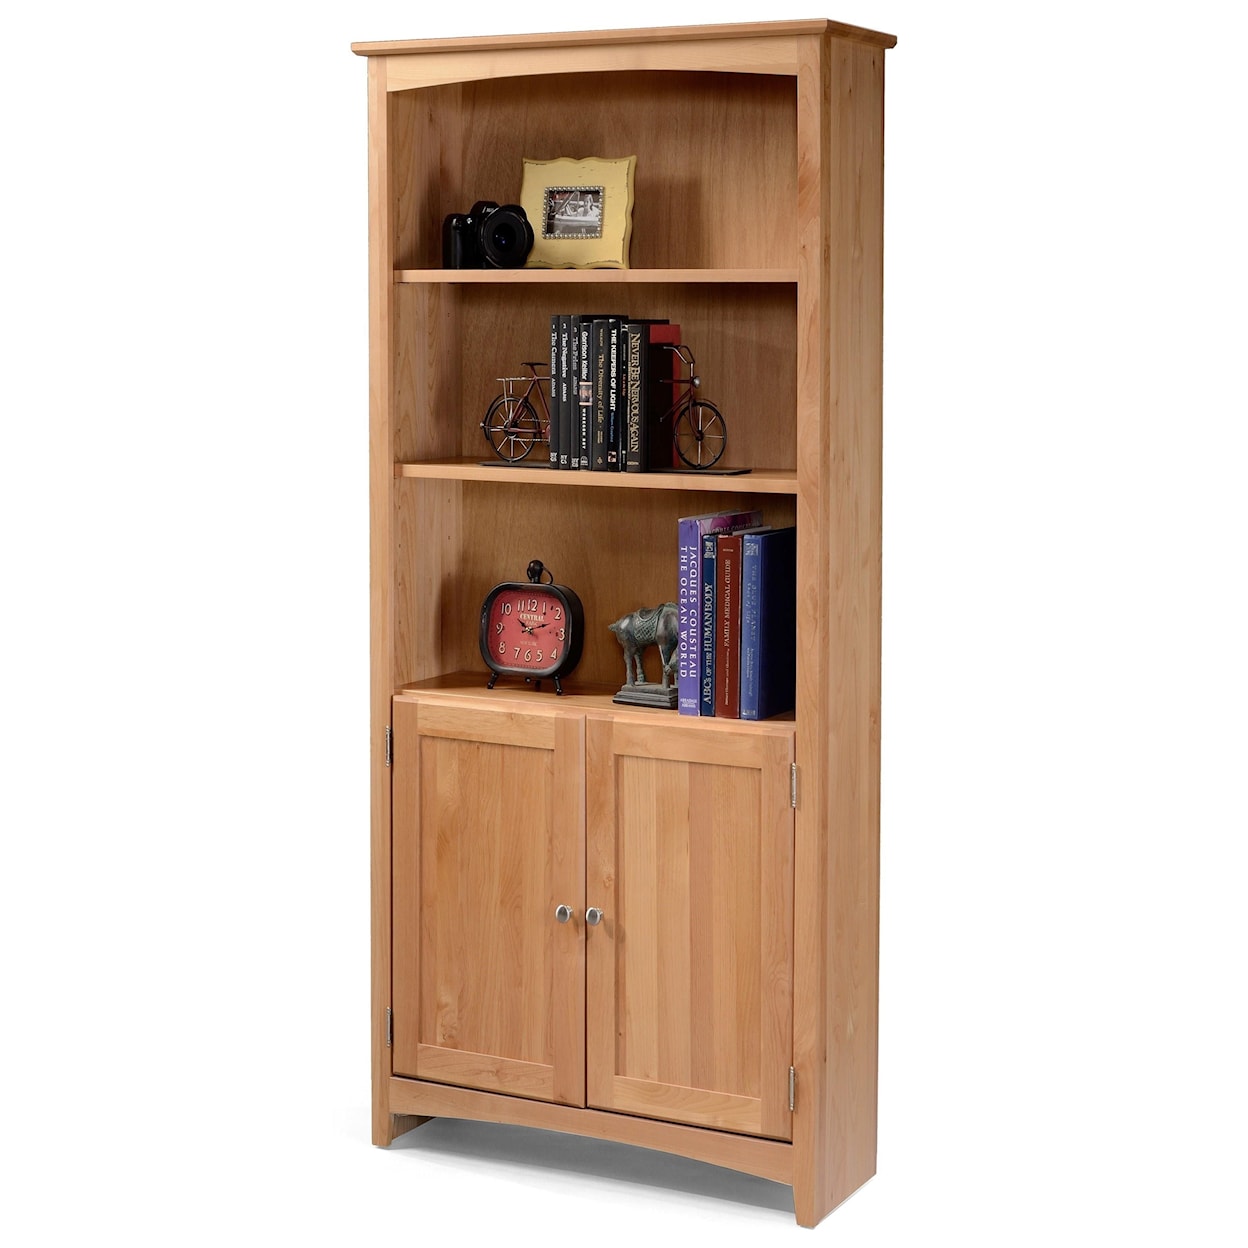 Archbold Furniture Alder Bookcases 968567169 Customizable 30 X 72 Solid Wood Alder Bookcase With